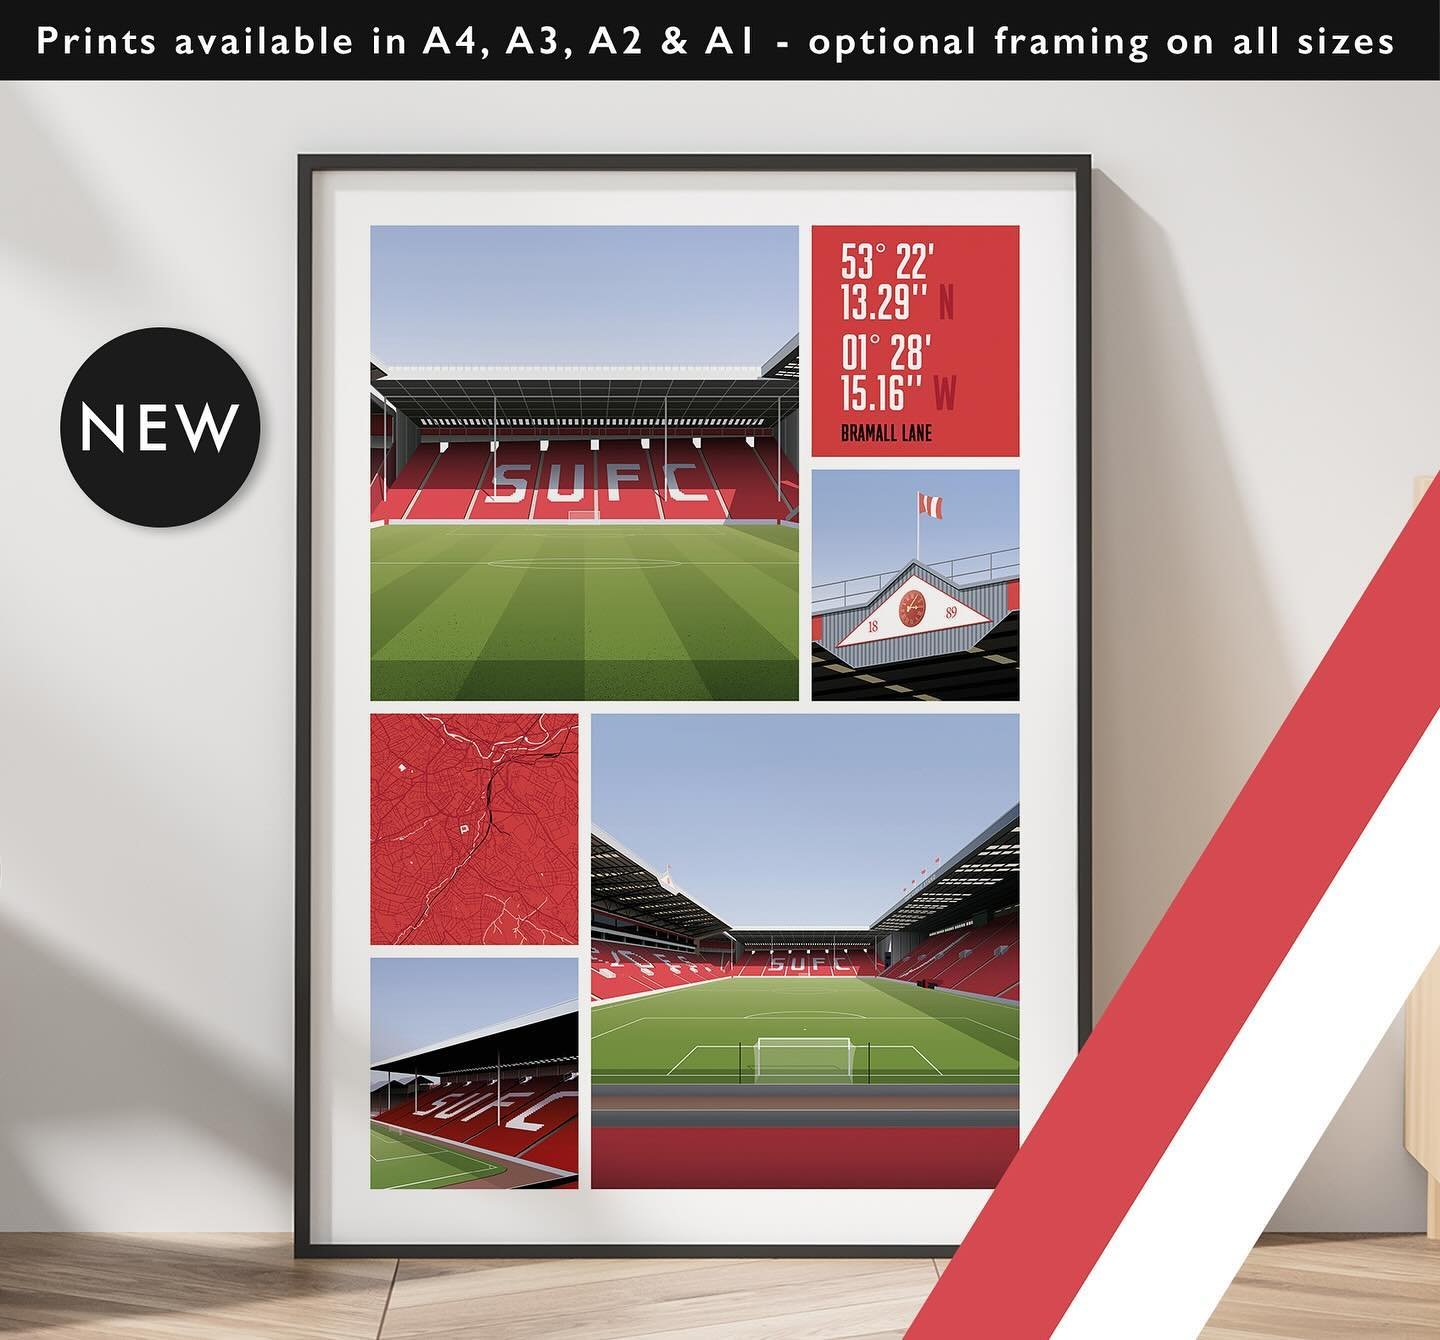 NEW: Views Of Bramall Lane 

Prints available in A4, A3, A2 &amp; A1 with optional framing 

Get 10% off until midnight with the discount code 
THE-BLADES 

Shop now: matthewjiwood.com/shop/bramall-l&hellip;

#SUFC #twitterblades #footy #football #fo